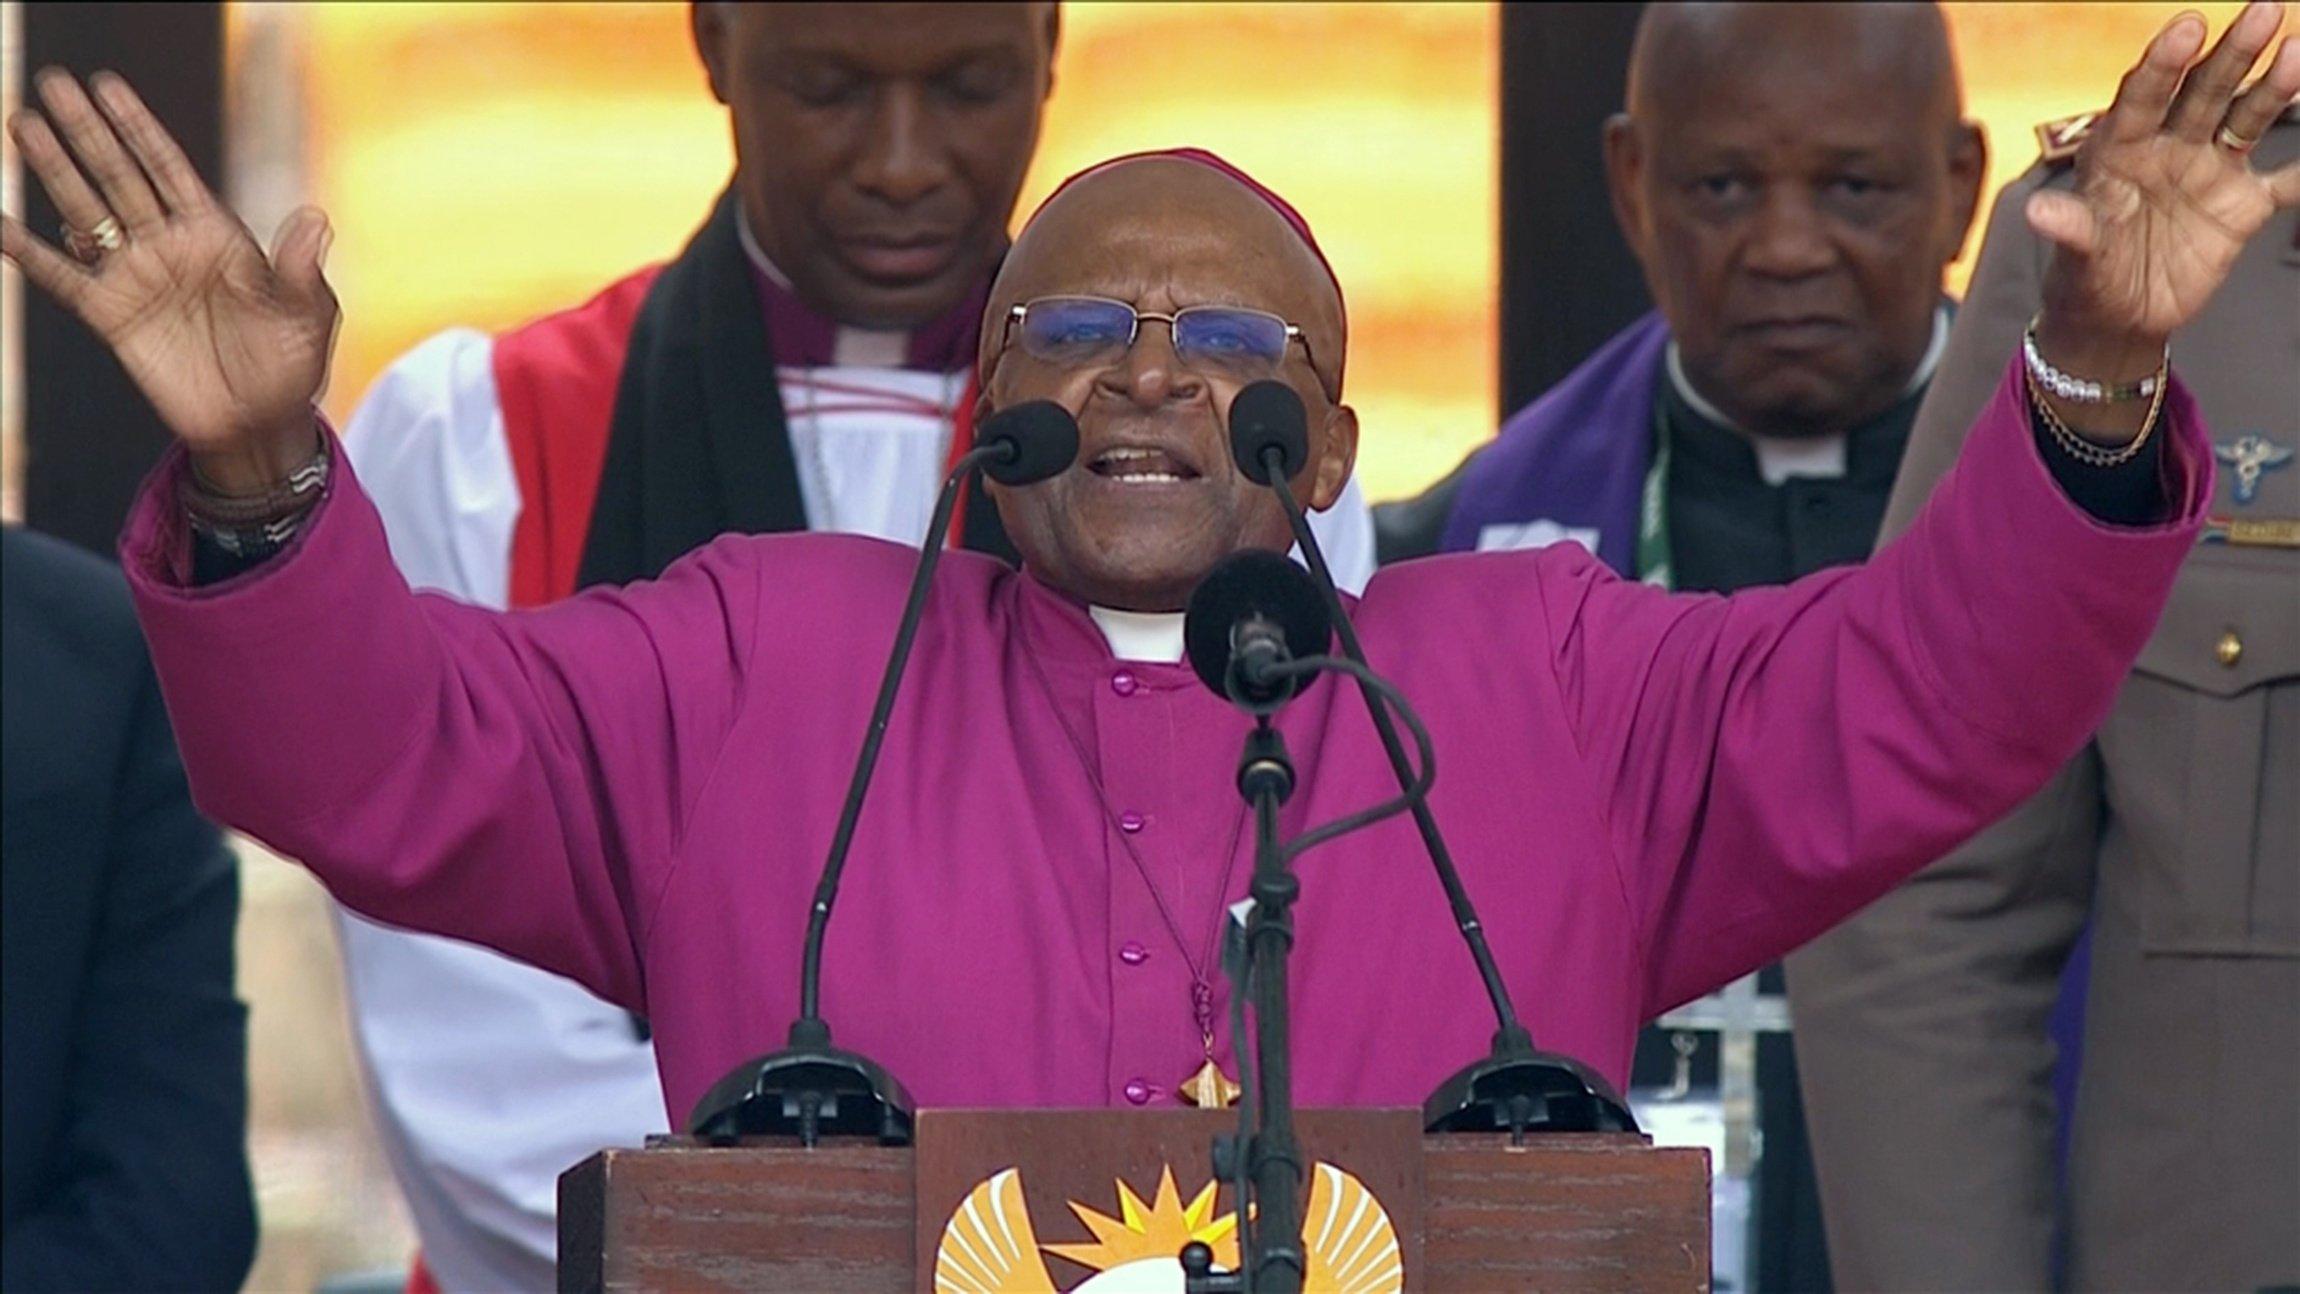 Archbishop Desmond Tutu – the joyful Christian who practised what he preached